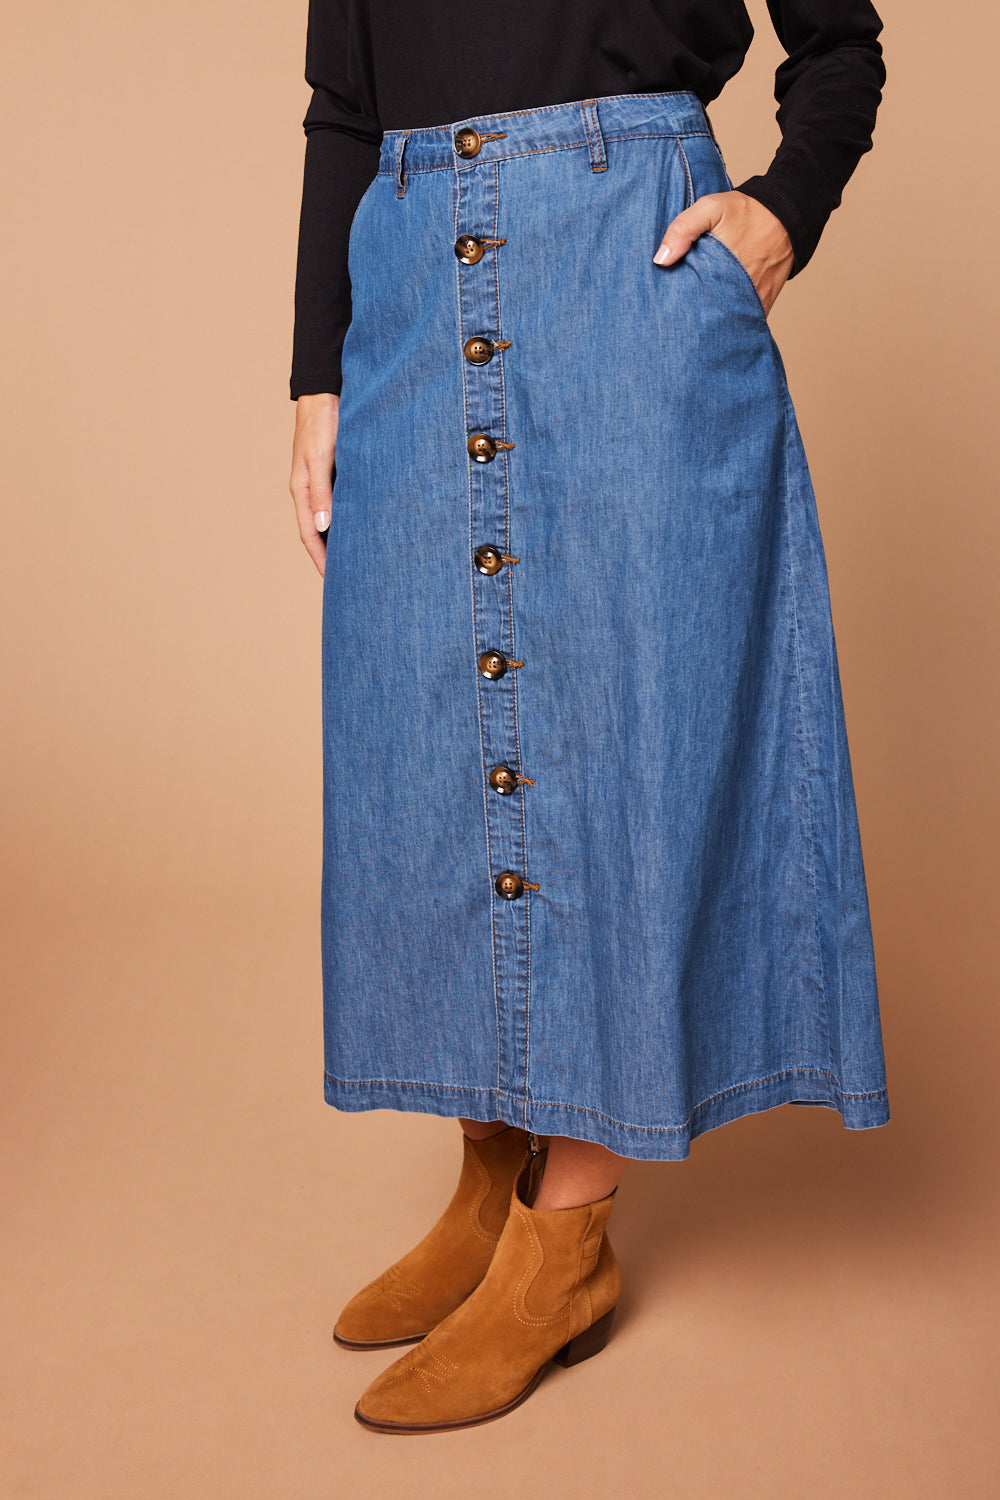 Adrift A-Line Button Down Skirt in Chambray